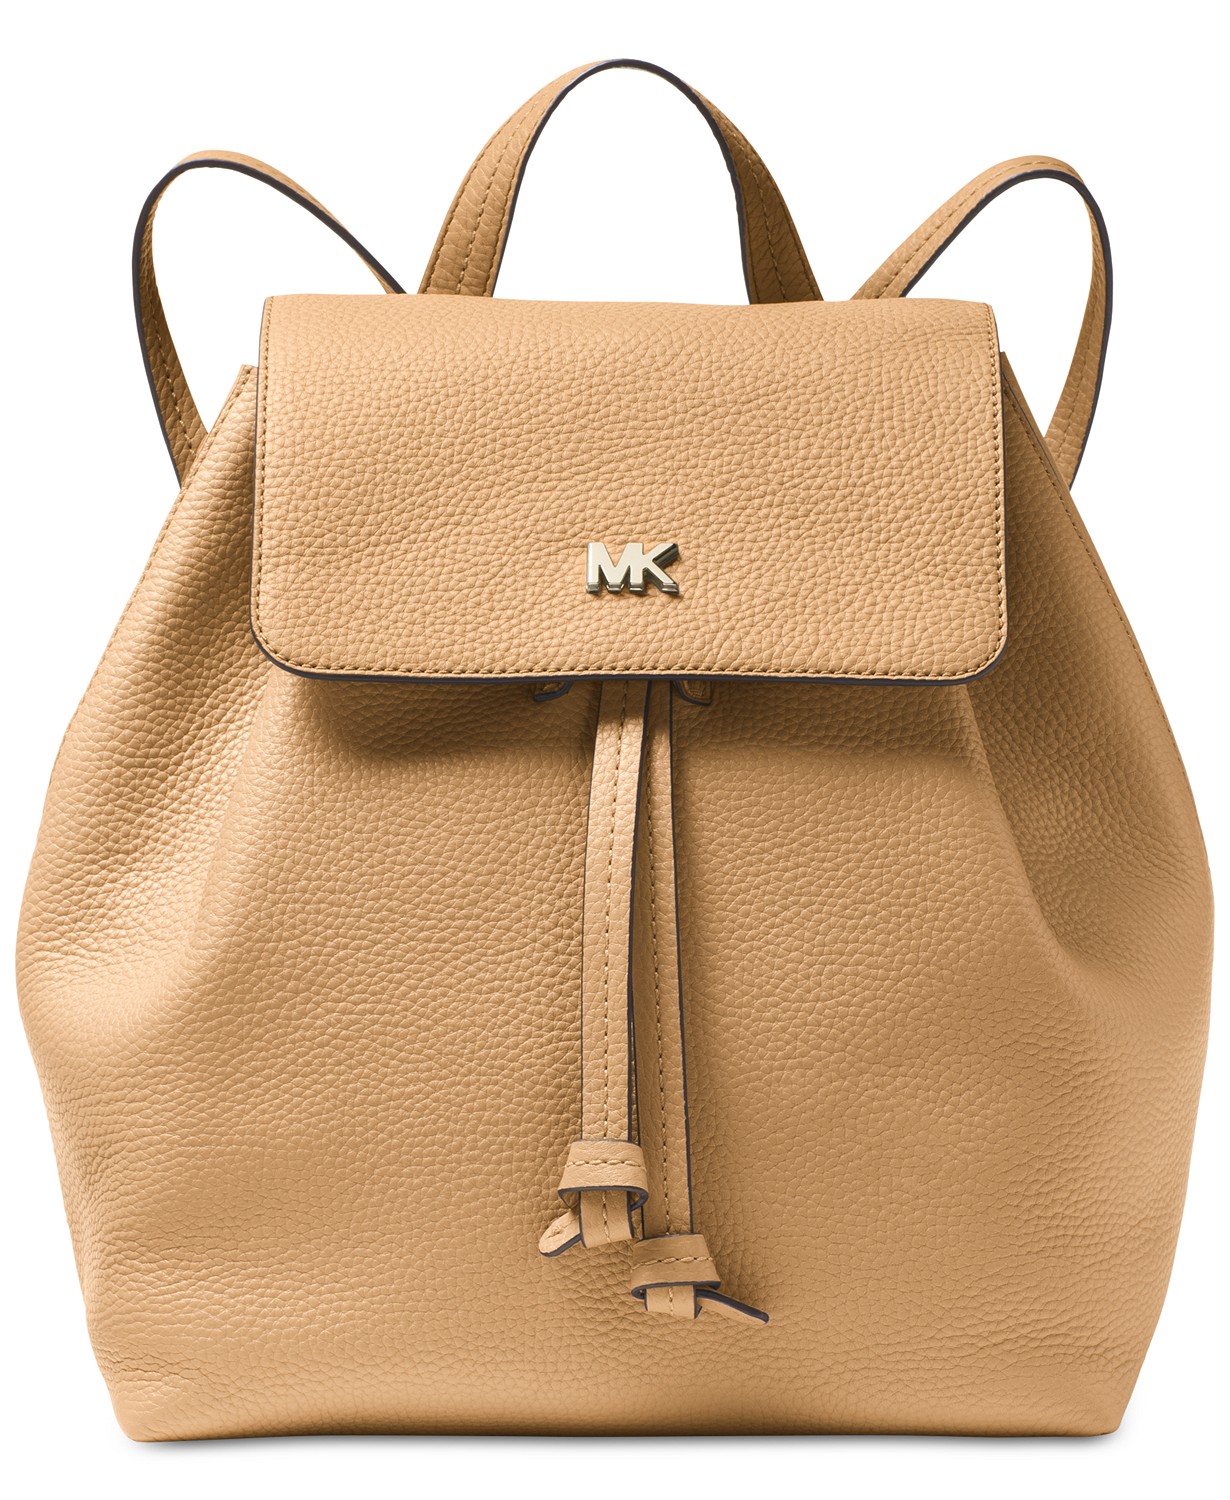 Shop Michael Kors Bags on Sale for Under $150 at Macy&#39;s